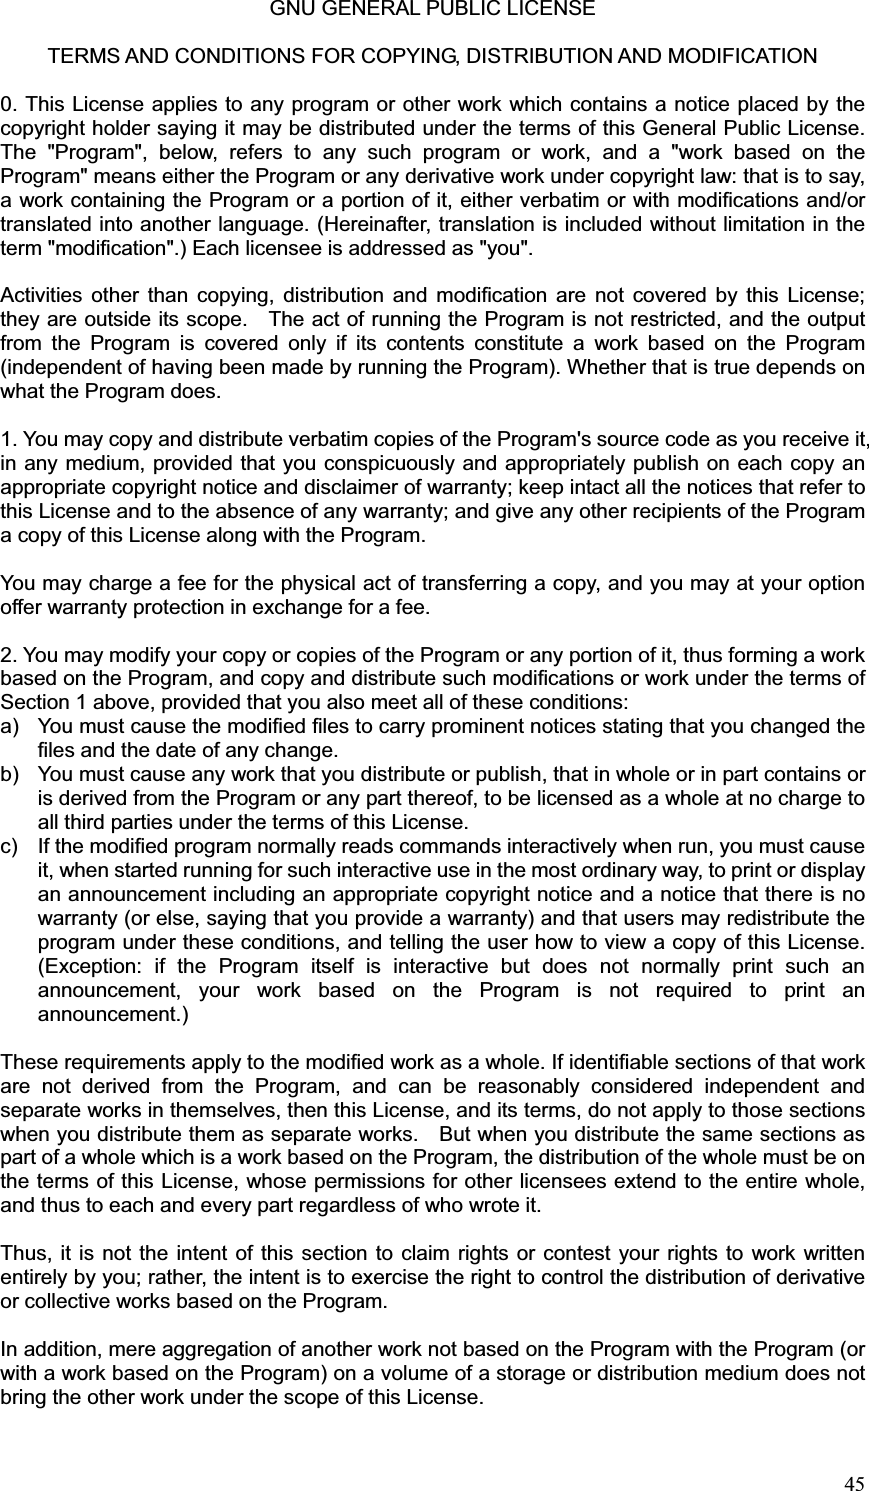 45GNU GENERAL PUBLIC LICENSE TERMS AND CONDITIONS FOR COPYING, DISTRIBUTION AND MODIFICATION 0. This License applies to any program or other work which contains a notice placed by the copyright holder saying it may be distributed under the terms of this General Public License. The &quot;Program&quot;, below, refers to any such program or work, and a &quot;work based on the Program&quot; means either the Program or any derivative work under copyright law: that is to say, a work containing the Program or a portion of it, either verbatim or with modifications and/or translated into another language. (Hereinafter, translation is included without limitation in the term &quot;modification&quot;.) Each licensee is addressed as &quot;you&quot;. Activities other than copying, distribution and modification are not covered by this License; they are outside its scope.    The act of running the Program is not restricted, and the output from the Program is covered only if its contents constitute a work based on the Program (independent of having been made by running the Program). Whether that is true depends on what the Program does. 1. You may copy and distribute verbatim copies of the Program&apos;s source code as you receive it, in any medium, provided that you conspicuously and appropriately publish on each copy an appropriate copyright notice and disclaimer of warranty; keep intact all the notices that refer to this License and to the absence of any warranty; and give any other recipients of the Program a copy of this License along with the Program. You may charge a fee for the physical act of transferring a copy, and you may at your option offer warranty protection in exchange for a fee. 2. You may modify your copy or copies of the Program or any portion of it, thus forming a work based on the Program, and copy and distribute such modifications or work under the terms of Section 1 above, provided that you also meet all of these conditions: a)  You must cause the modified files to carry prominent notices stating that you changed the files and the date of any change. b)  You must cause any work that you distribute or publish, that in whole or in part contains or is derived from the Program or any part thereof, to be licensed as a whole at no charge to all third parties under the terms of this License. c)  If the modified program normally reads commands interactively when run, you must cause it, when started running for such interactive use in the most ordinary way, to print or display an announcement including an appropriate copyright notice and a notice that there is no warranty (or else, saying that you provide a warranty) and that users may redistribute the program under these conditions, and telling the user how to view a copy of this License. (Exception: if the Program itself is interactive but does not normally print such an announcement, your work based on the Program is not required to print an announcement.) These requirements apply to the modified work as a whole. If identifiable sections of that work are not derived from the Program, and can be reasonably considered independent and separate works in themselves, then this License, and its terms, do not apply to those sections when you distribute them as separate works.    But when you distribute the same sections as part of a whole which is a work based on the Program, the distribution of the whole must be on the terms of this License, whose permissions for other licensees extend to the entire whole, and thus to each and every part regardless of who wrote it. Thus, it is not the intent of this section to claim rights or contest your rights to work written entirely by you; rather, the intent is to exercise the right to control the distribution of derivative or collective works based on the Program. In addition, mere aggregation of another work not based on the Program with the Program (or with a work based on the Program) on a volume of a storage or distribution medium does not bring the other work under the scope of this License. 